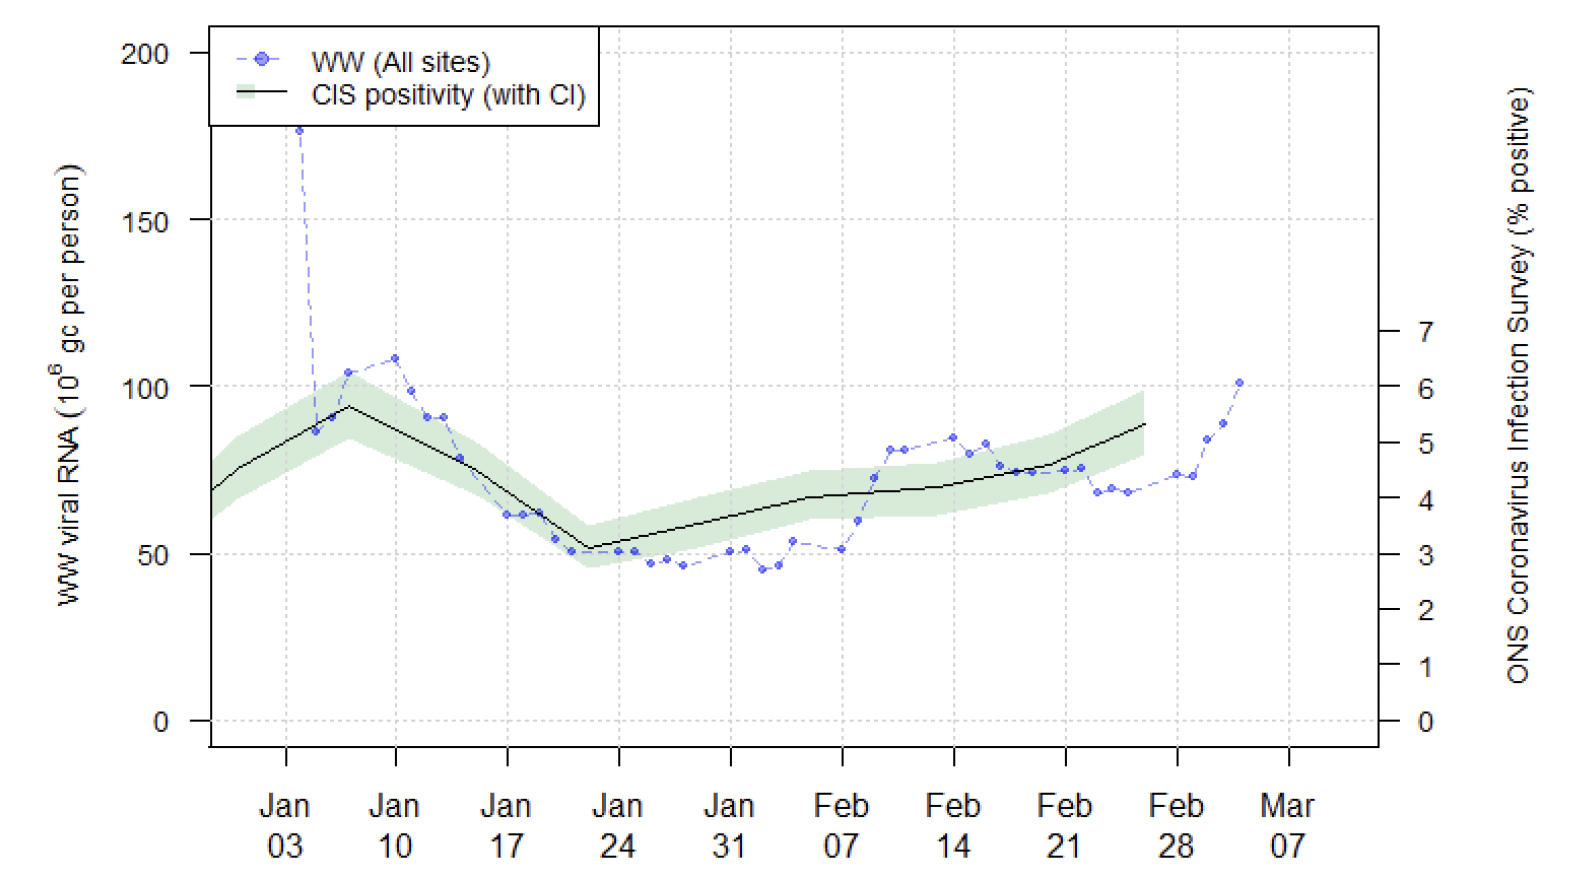 a line chart showing the national running average trends in wastewater Covid-19 from 31 December 2021 to 4 March 2022, and CIS positivity estimates from 31 December 2021 to 26 February 2022 . After a steep decrease in early January, Covid-19 wastewater levels appear to fluctuate throughout January, with increases visible in early February and early March.